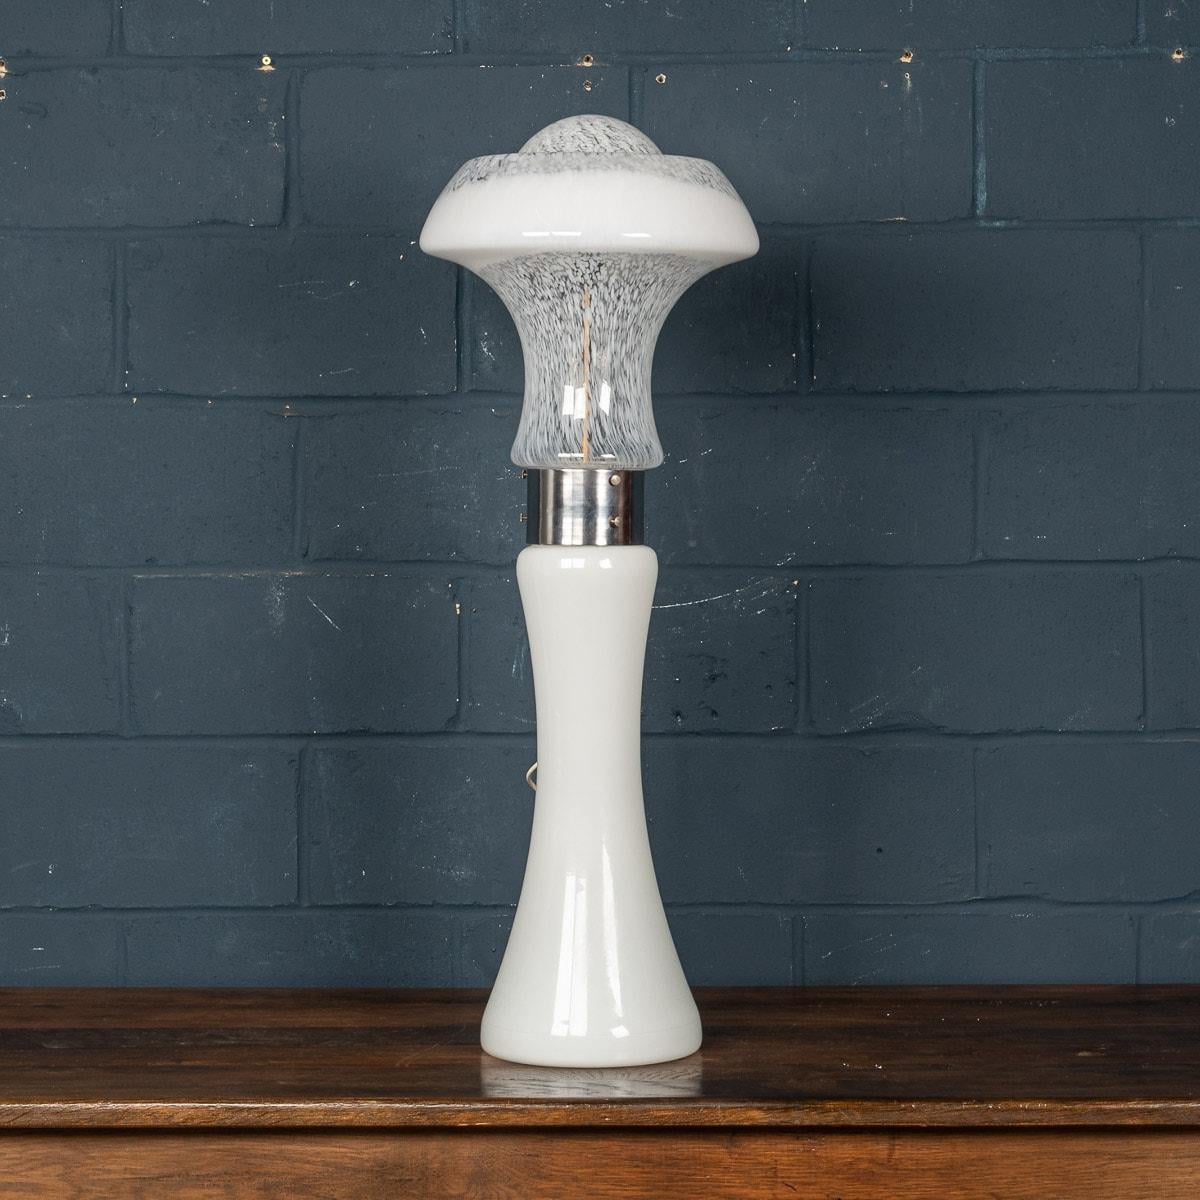 A wonderful vintage Italian floor lamp or large table lamp made by Carlo Nason for Mazzega. Produced in Murano, Venice in the 1980s, this chrome and glass lamp exemplifies Carlo Nason’s workmanship. Nason has used a lovely shaped white form for the